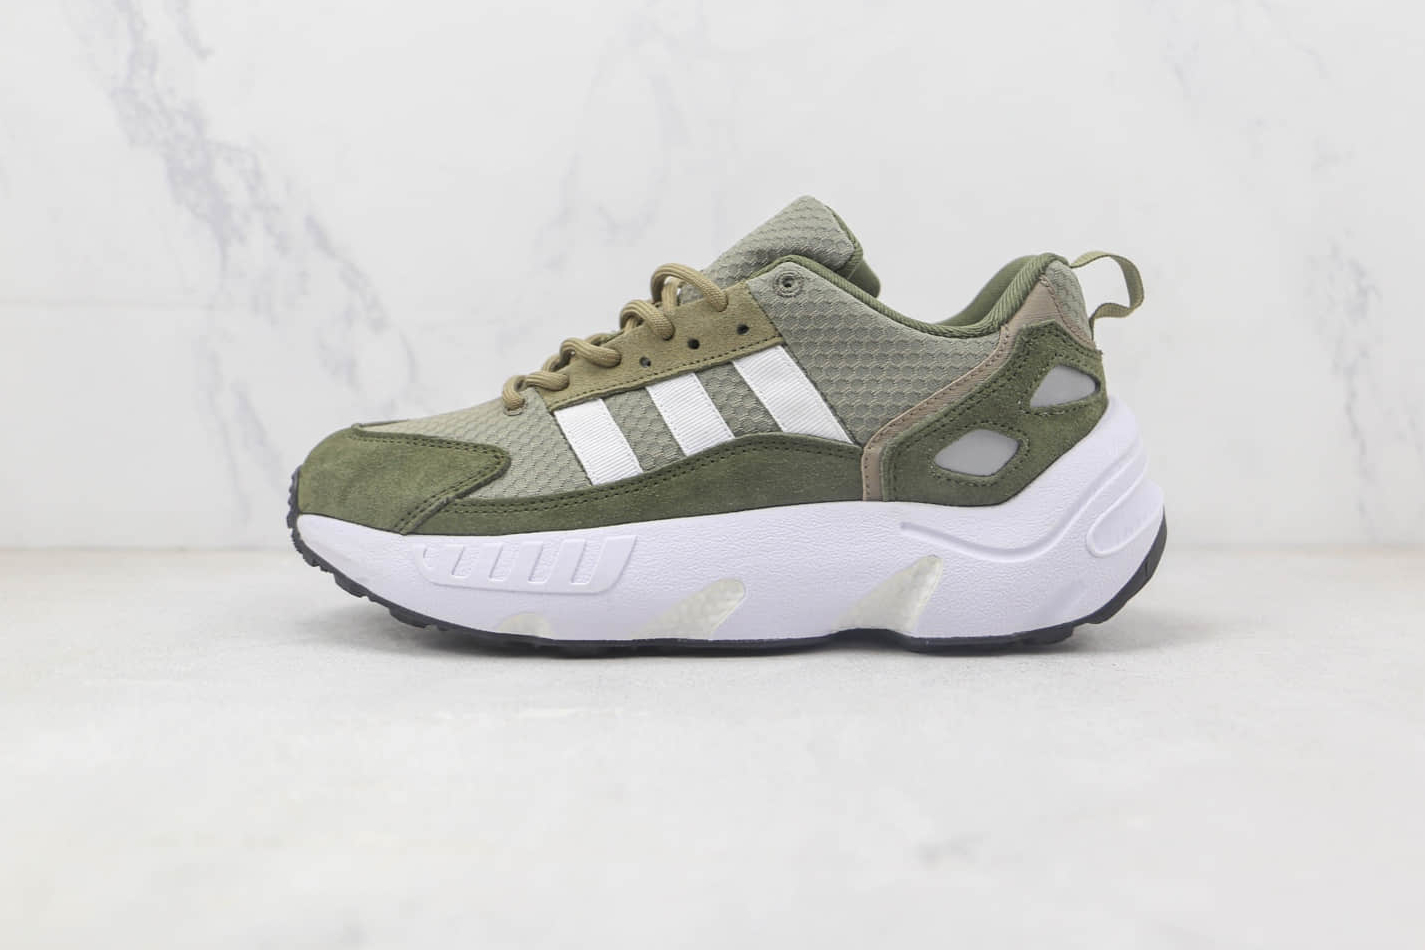 Adidas ZX 22 BOOST Orbit Green - Cloud White and Olive Colors GX2040